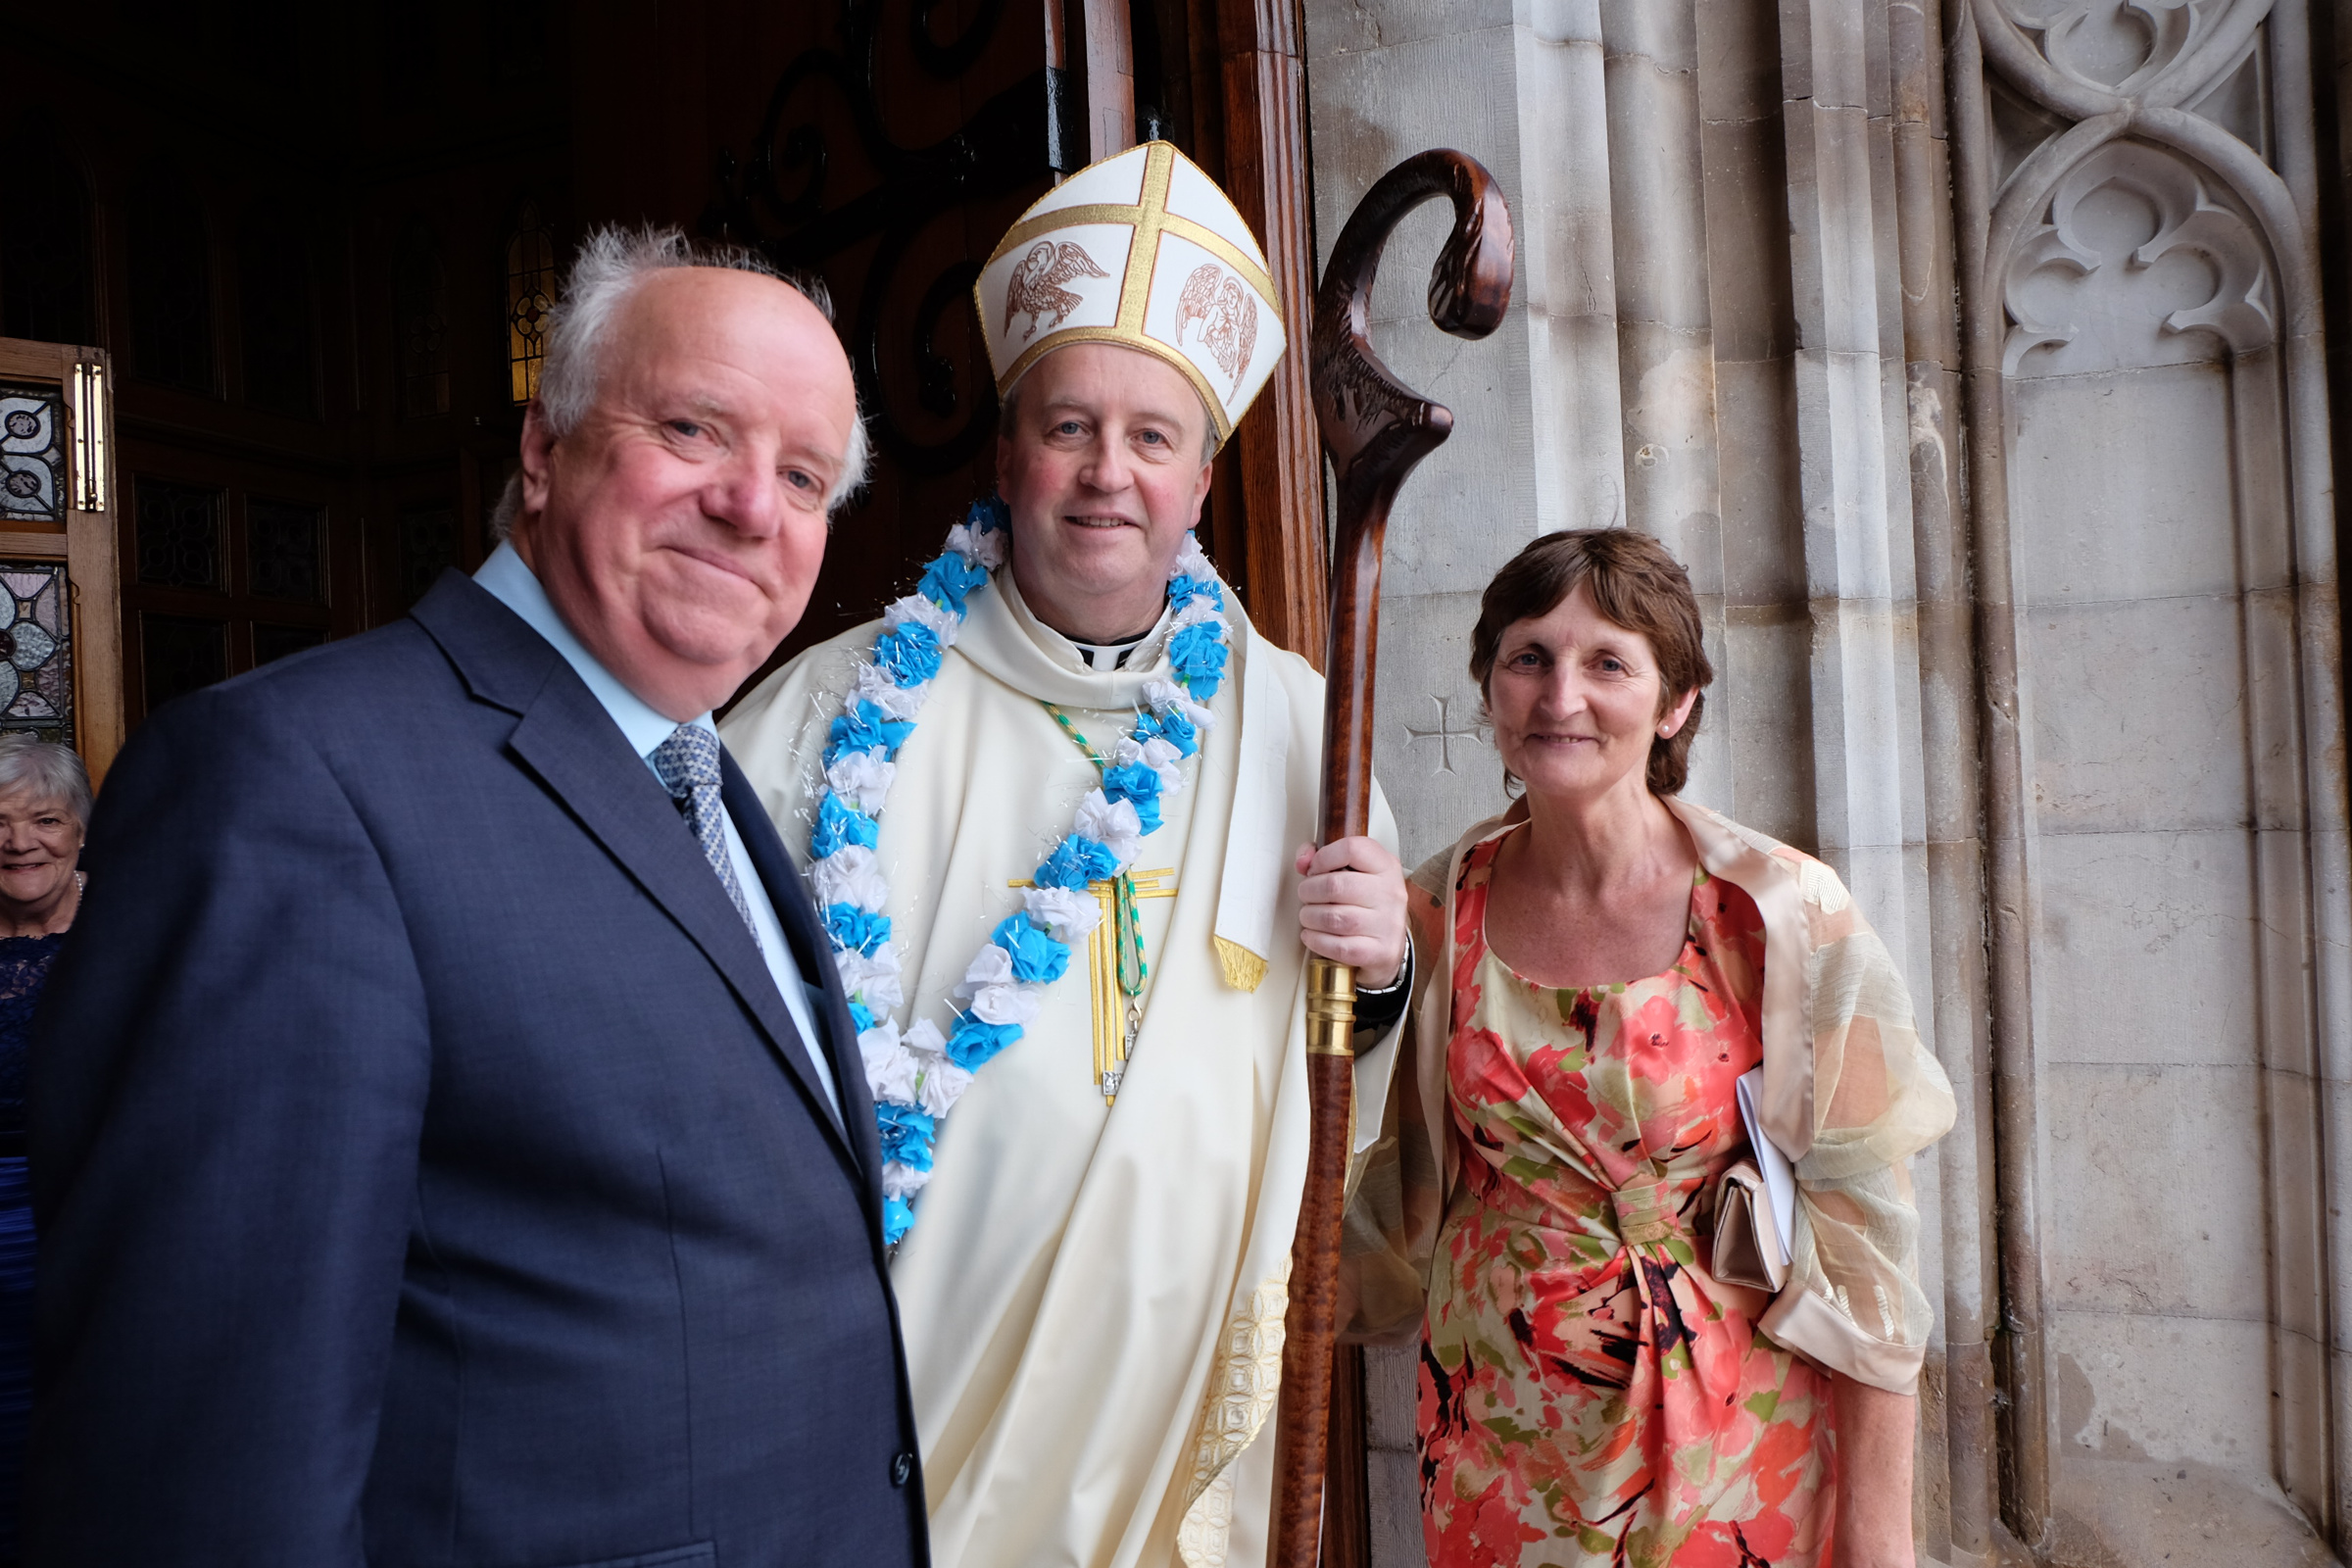 Senator Joe and Mrs Mary O'Reilly with Bishop Michael RouterOrdination of Bishop Michael RouterSt Patrick's Cathedral, Armagh,  21 July 2019Credit: LiamMcArdle.com